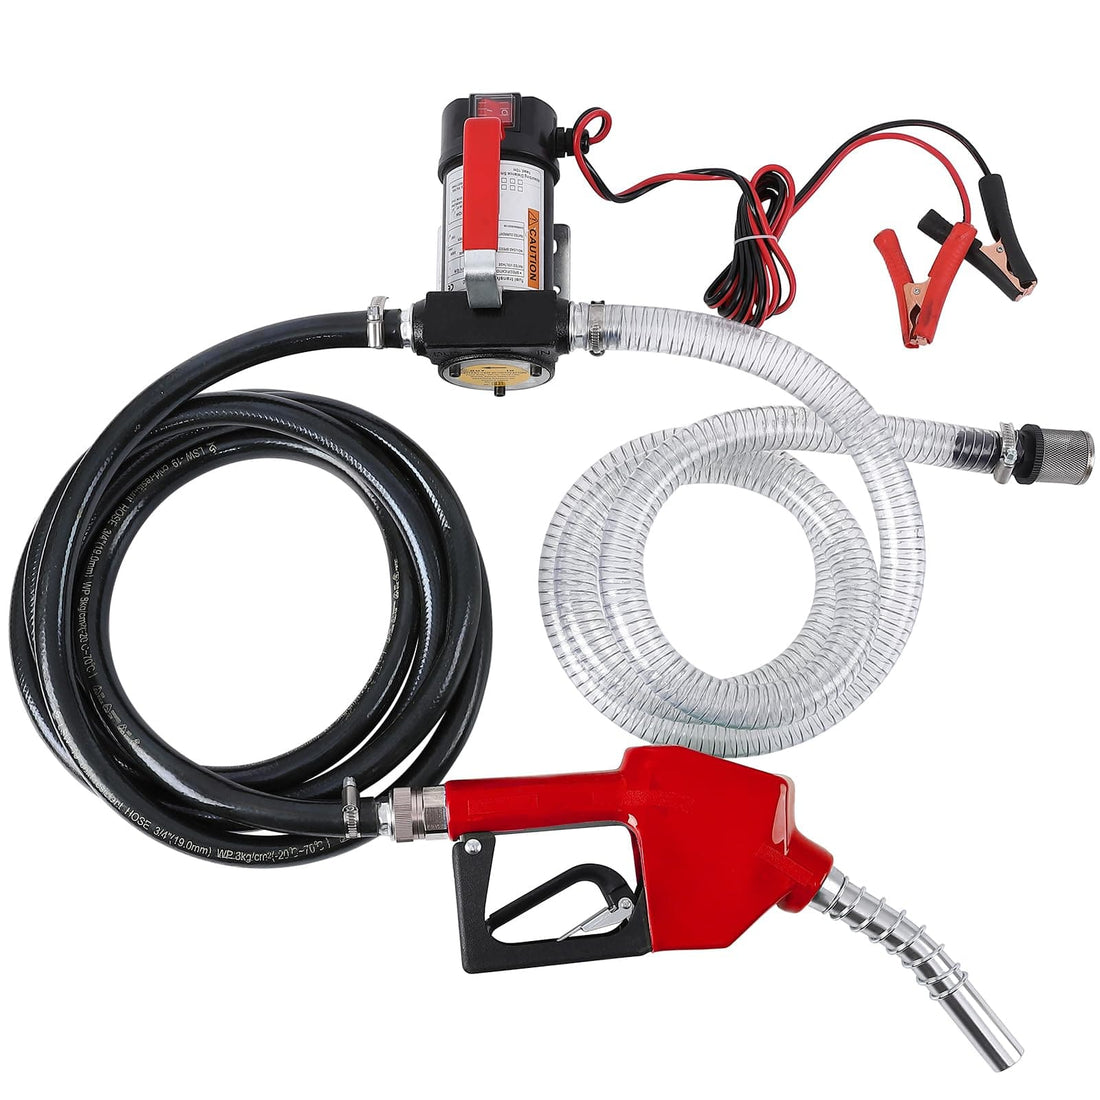 12V, 40LPM Portable Electric Fuel Pump Kit with Auto Nozzle, Red